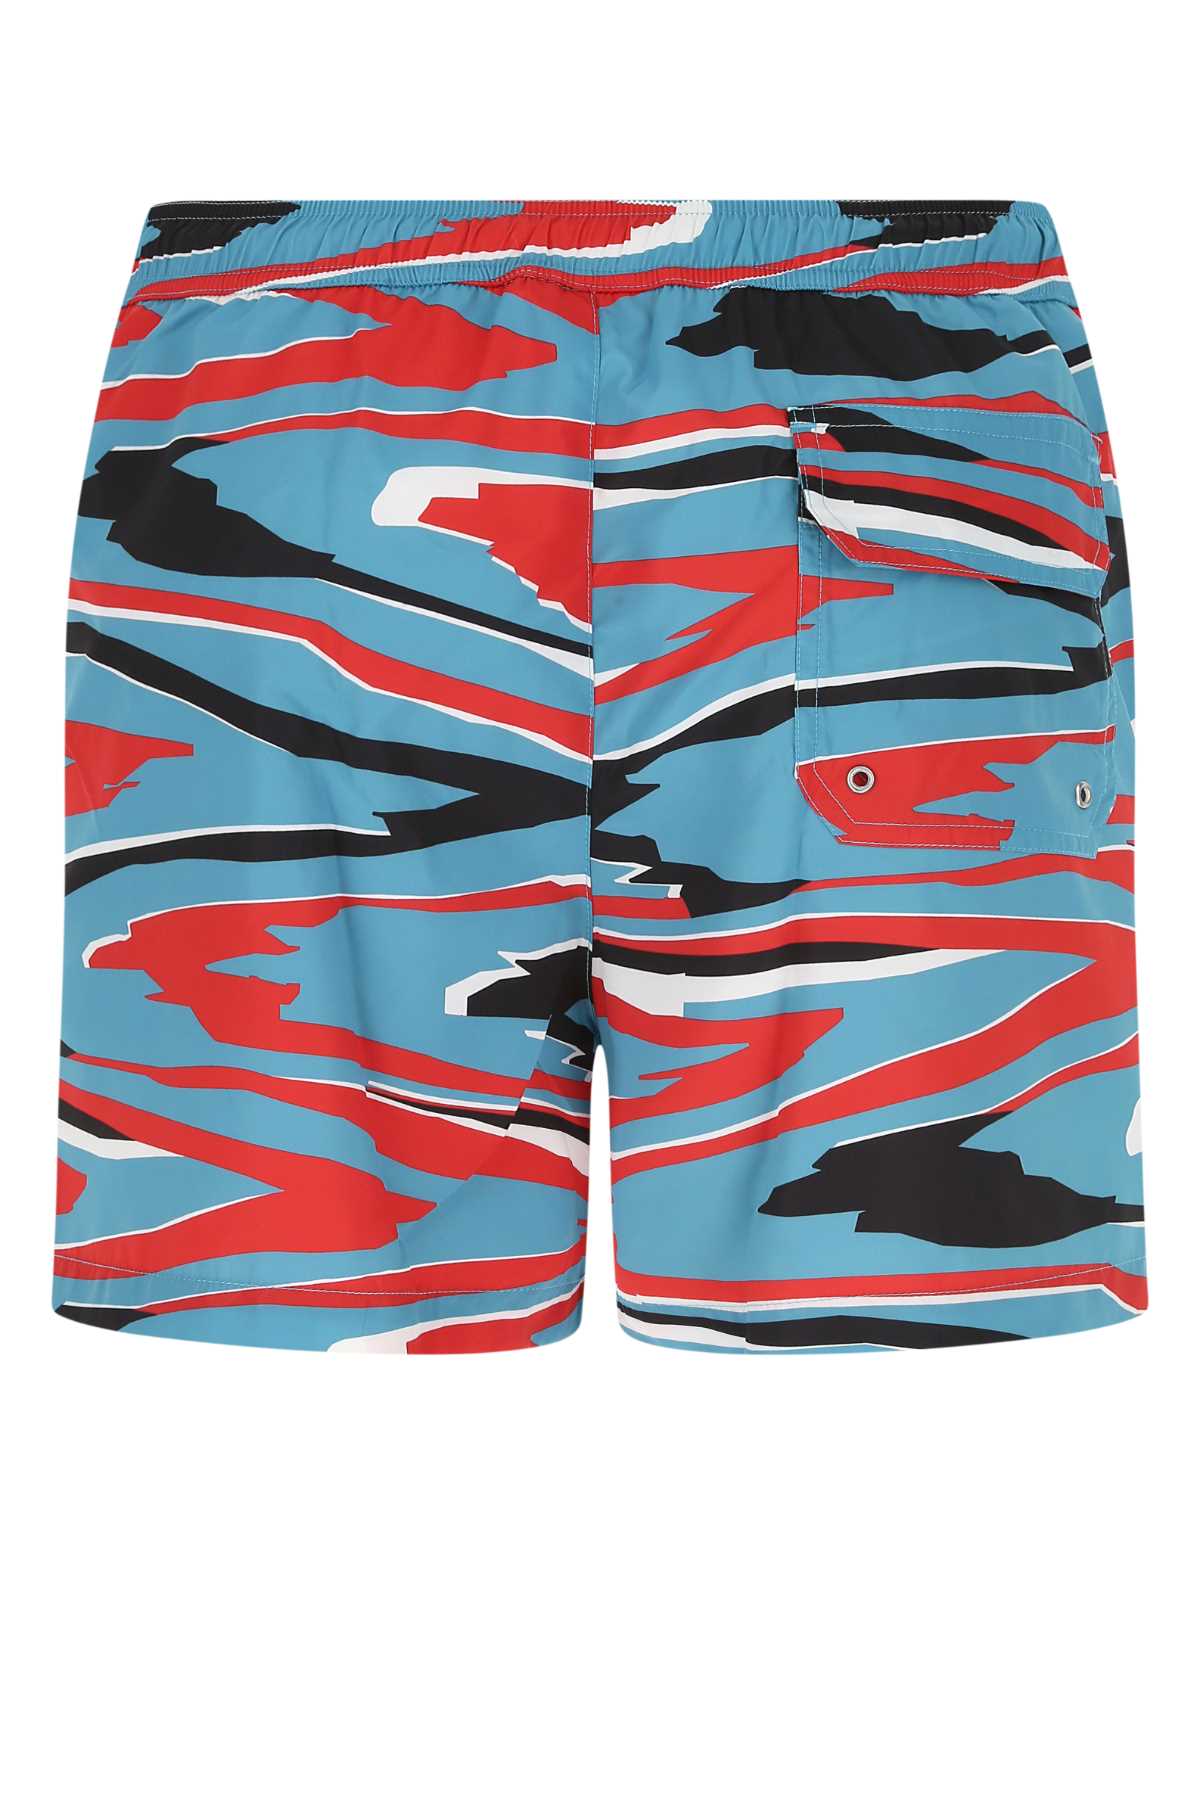 Missoni Printed Polyester Swimming Shorts In F402a